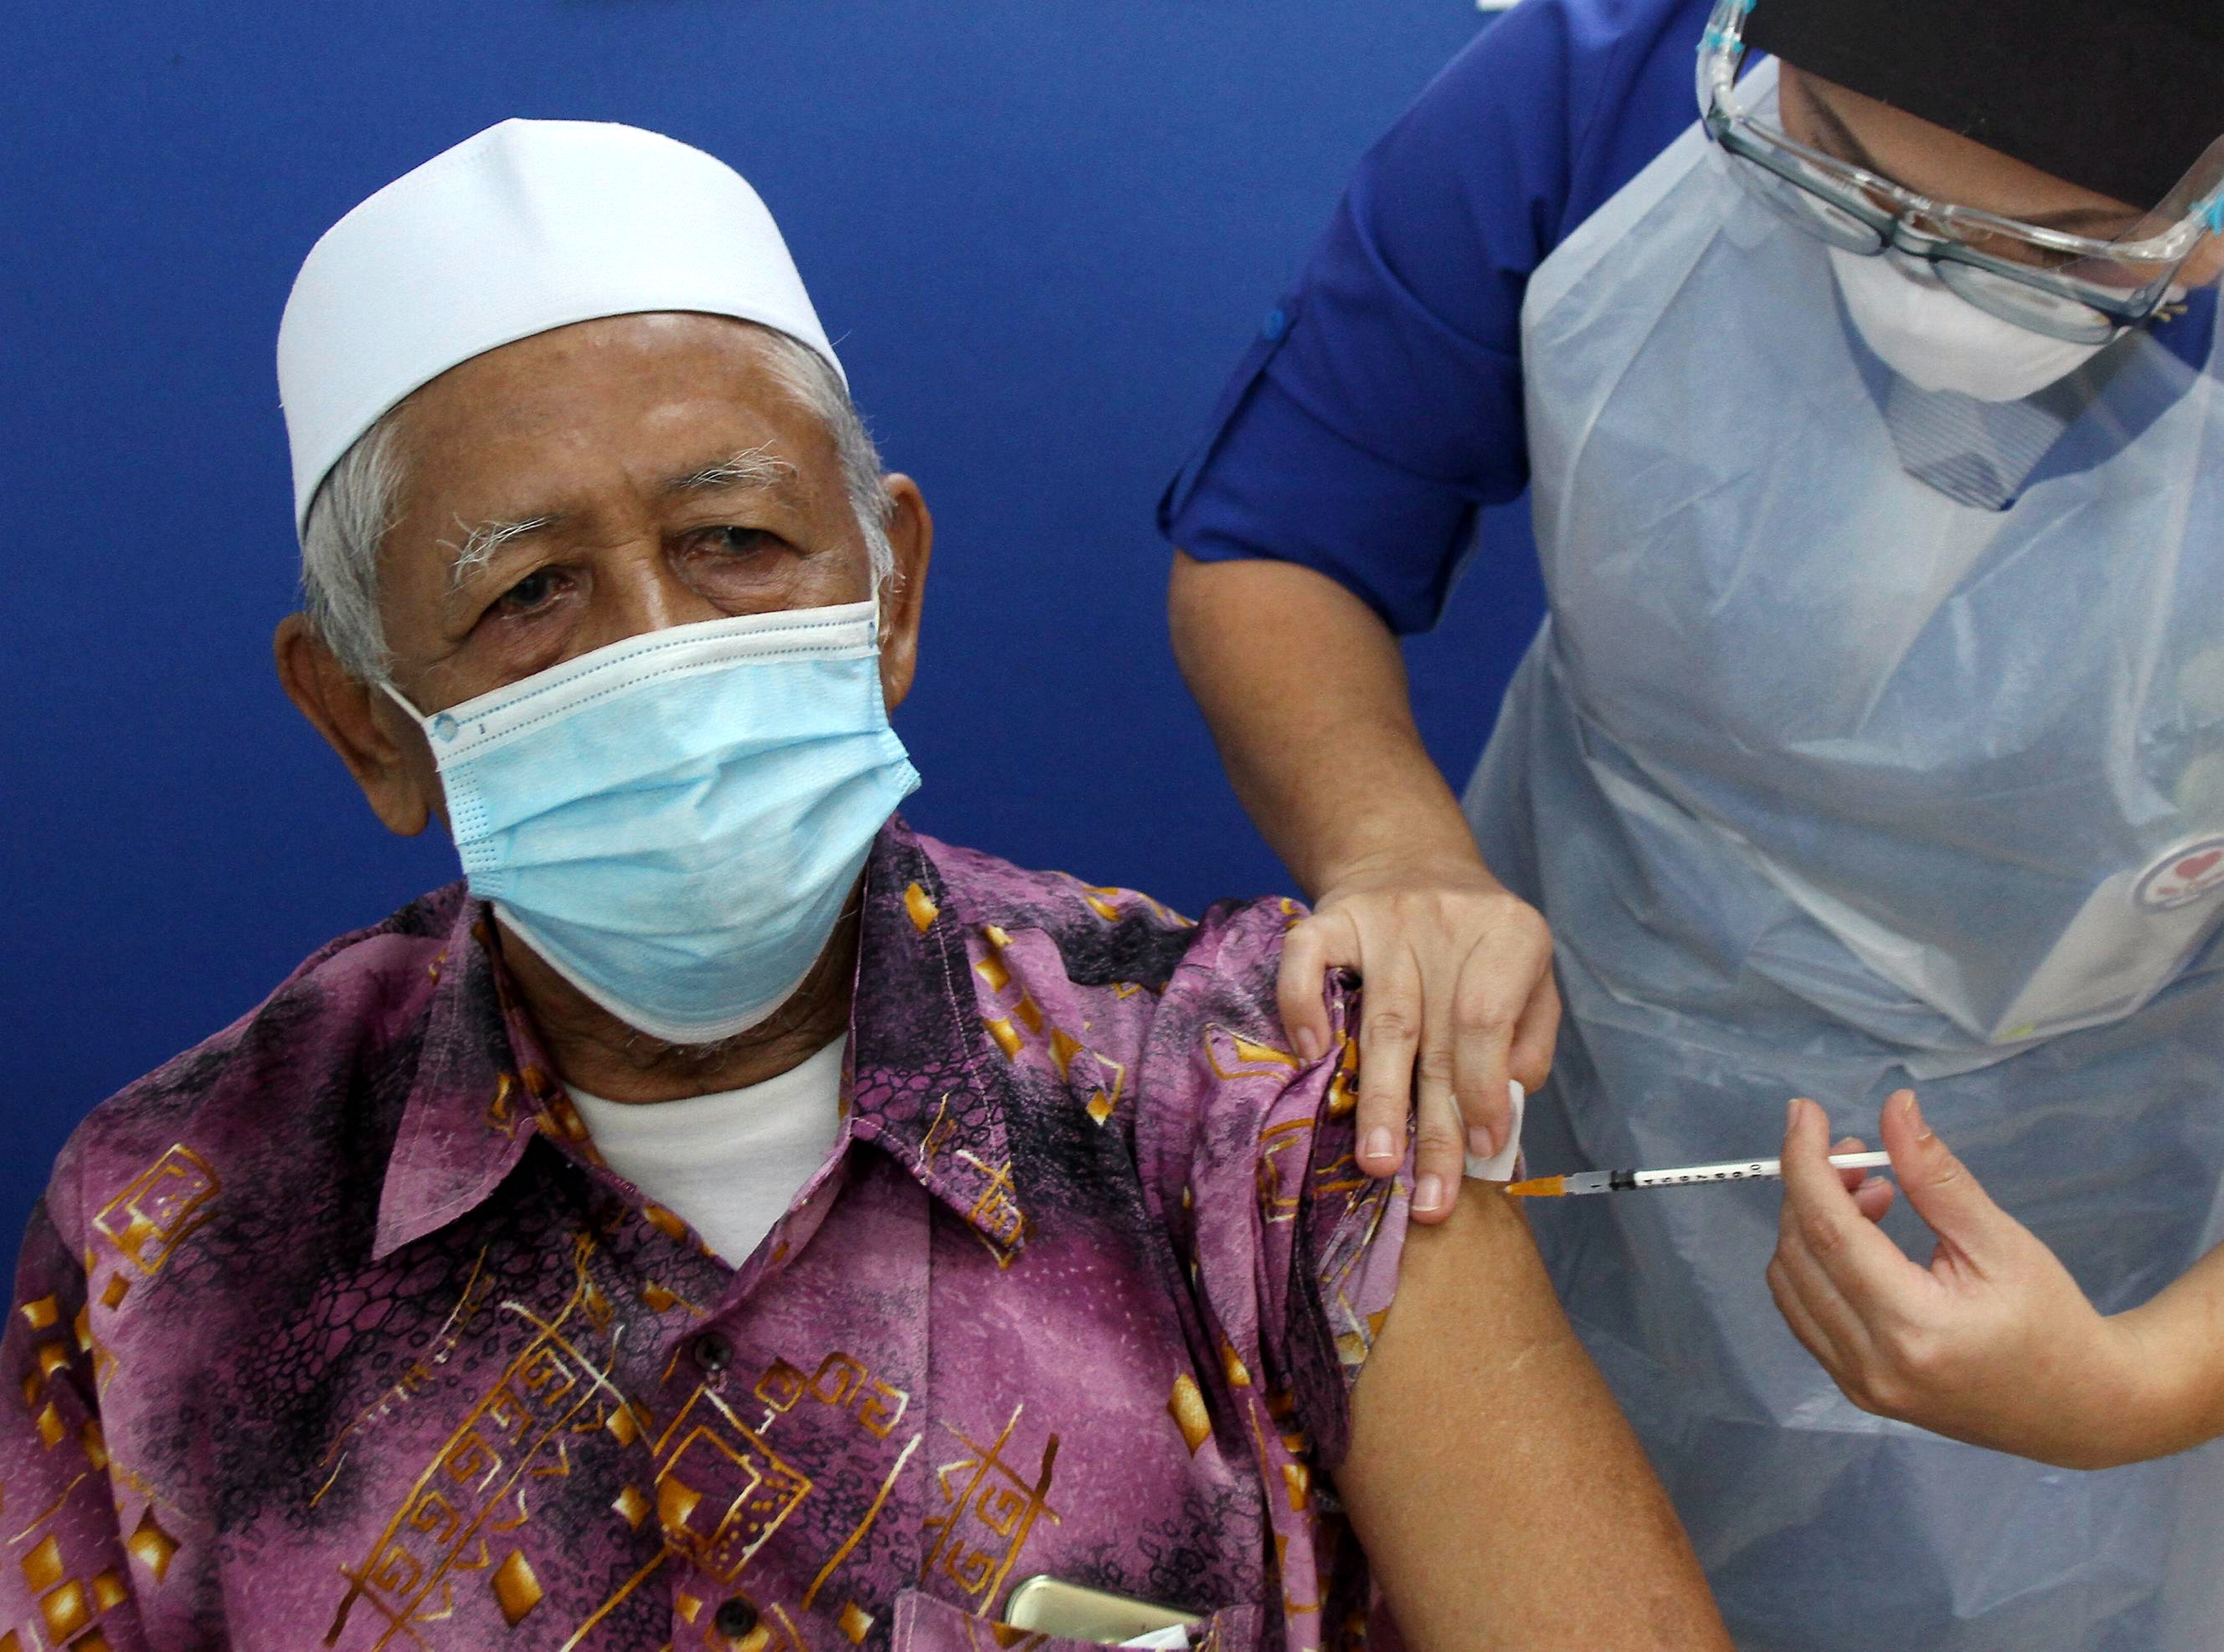 An elderly man receives a dose of the Sinovac Covid-19 vaccine at a local hospital in Ipoh, Malaysia, on June 1. The country has one of the highest coronavirus infection rates in the world. Photo: dpa